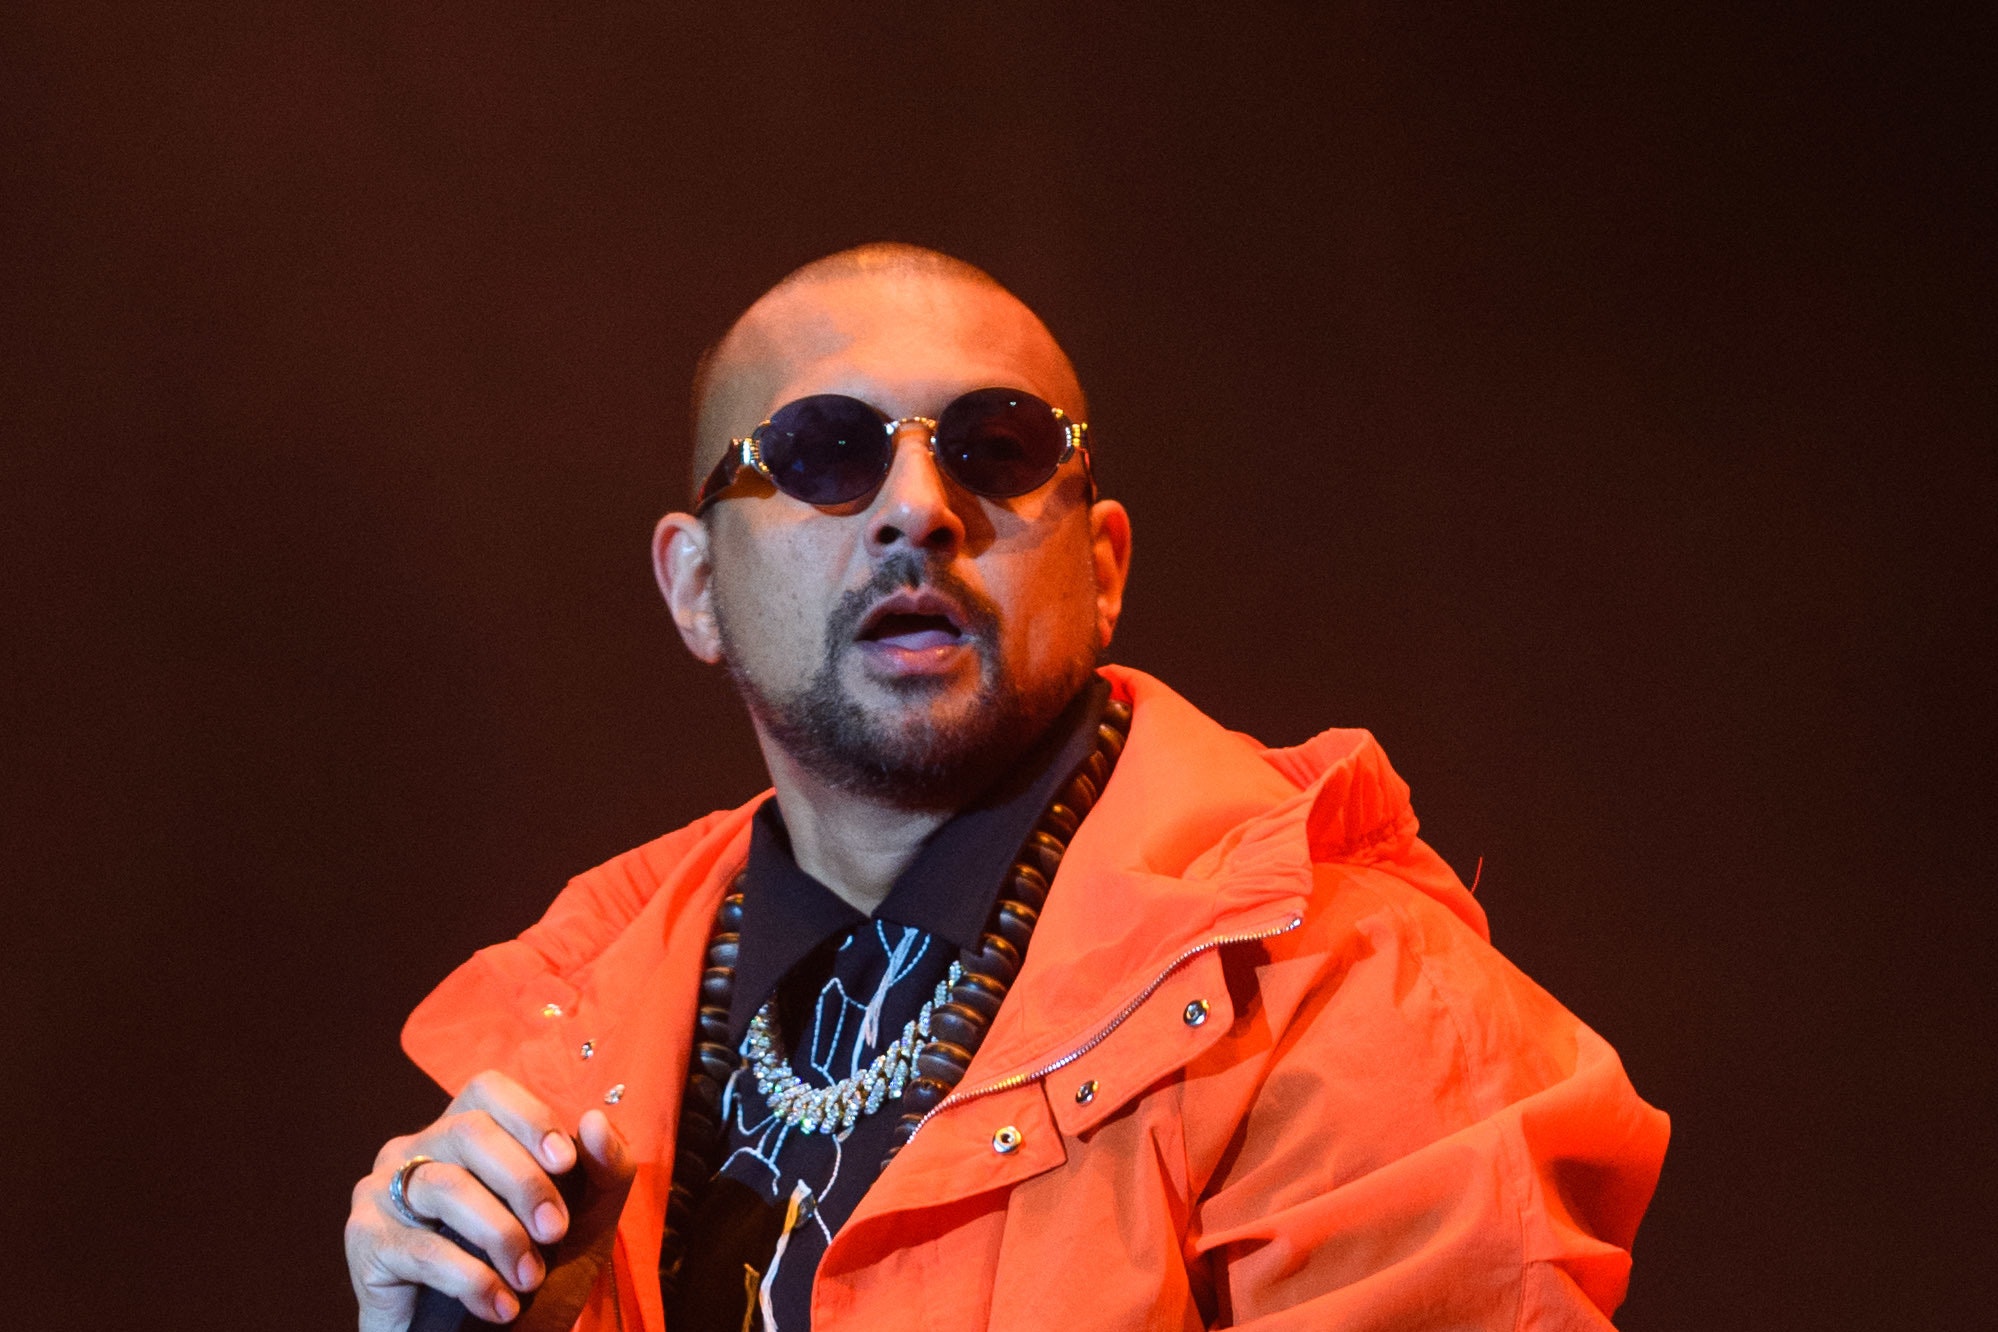 Sean Paul to play at Glasgow's O2 Academy next year on Scorcha tour